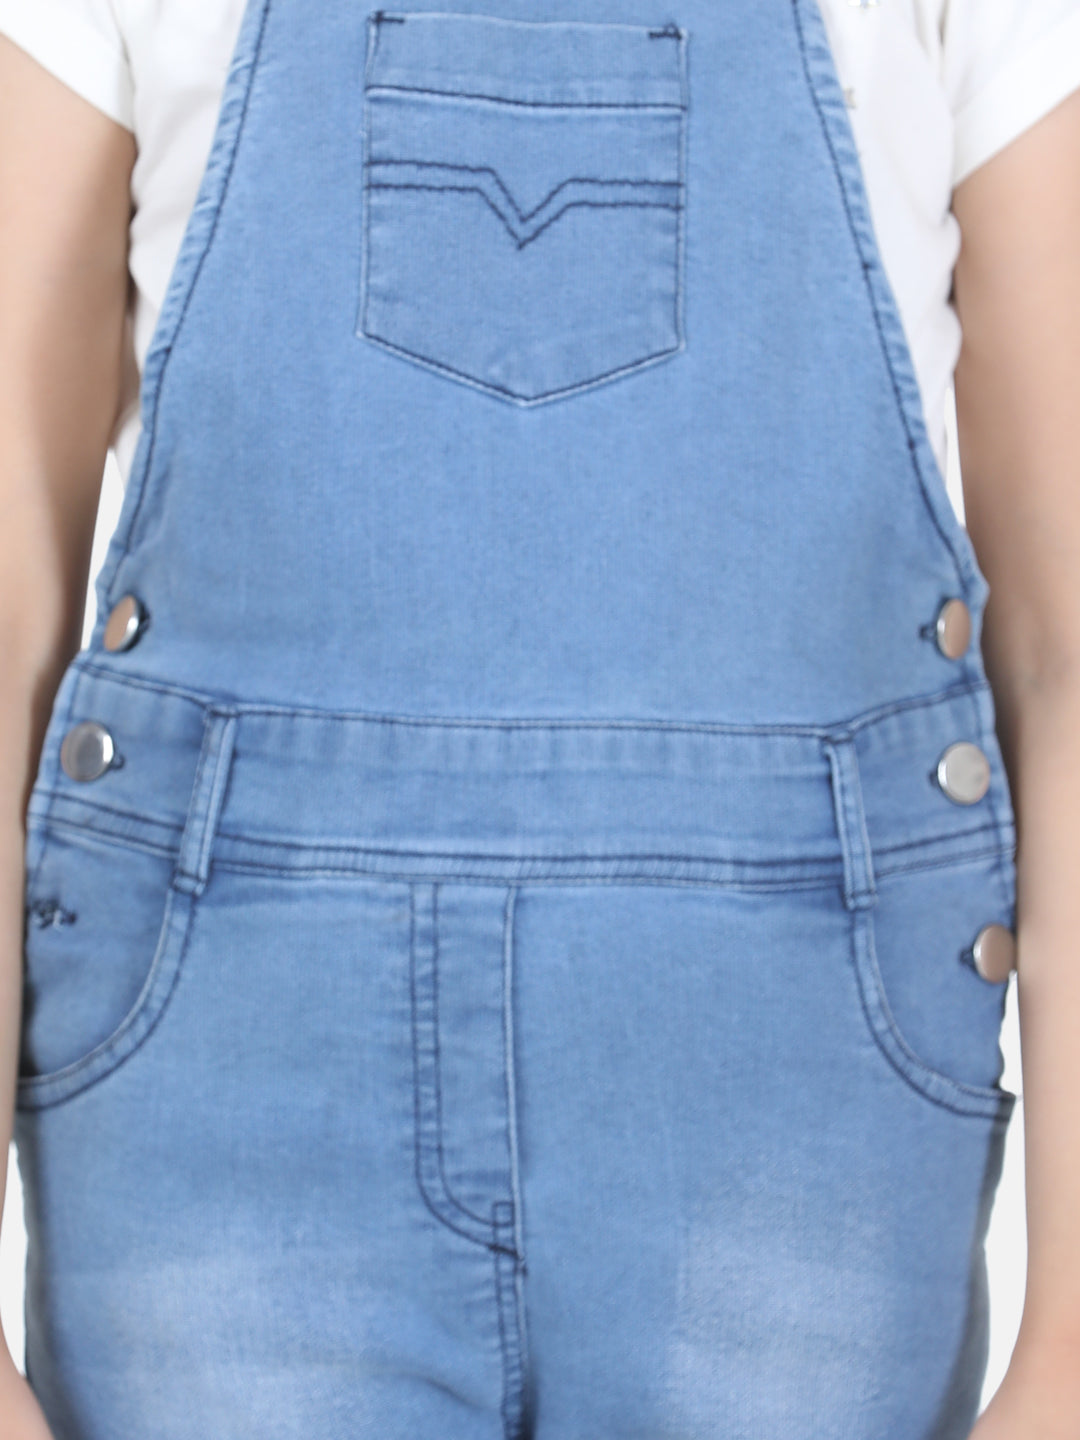 Girls Denim Roll Up Dungaree (T-shirt not included)